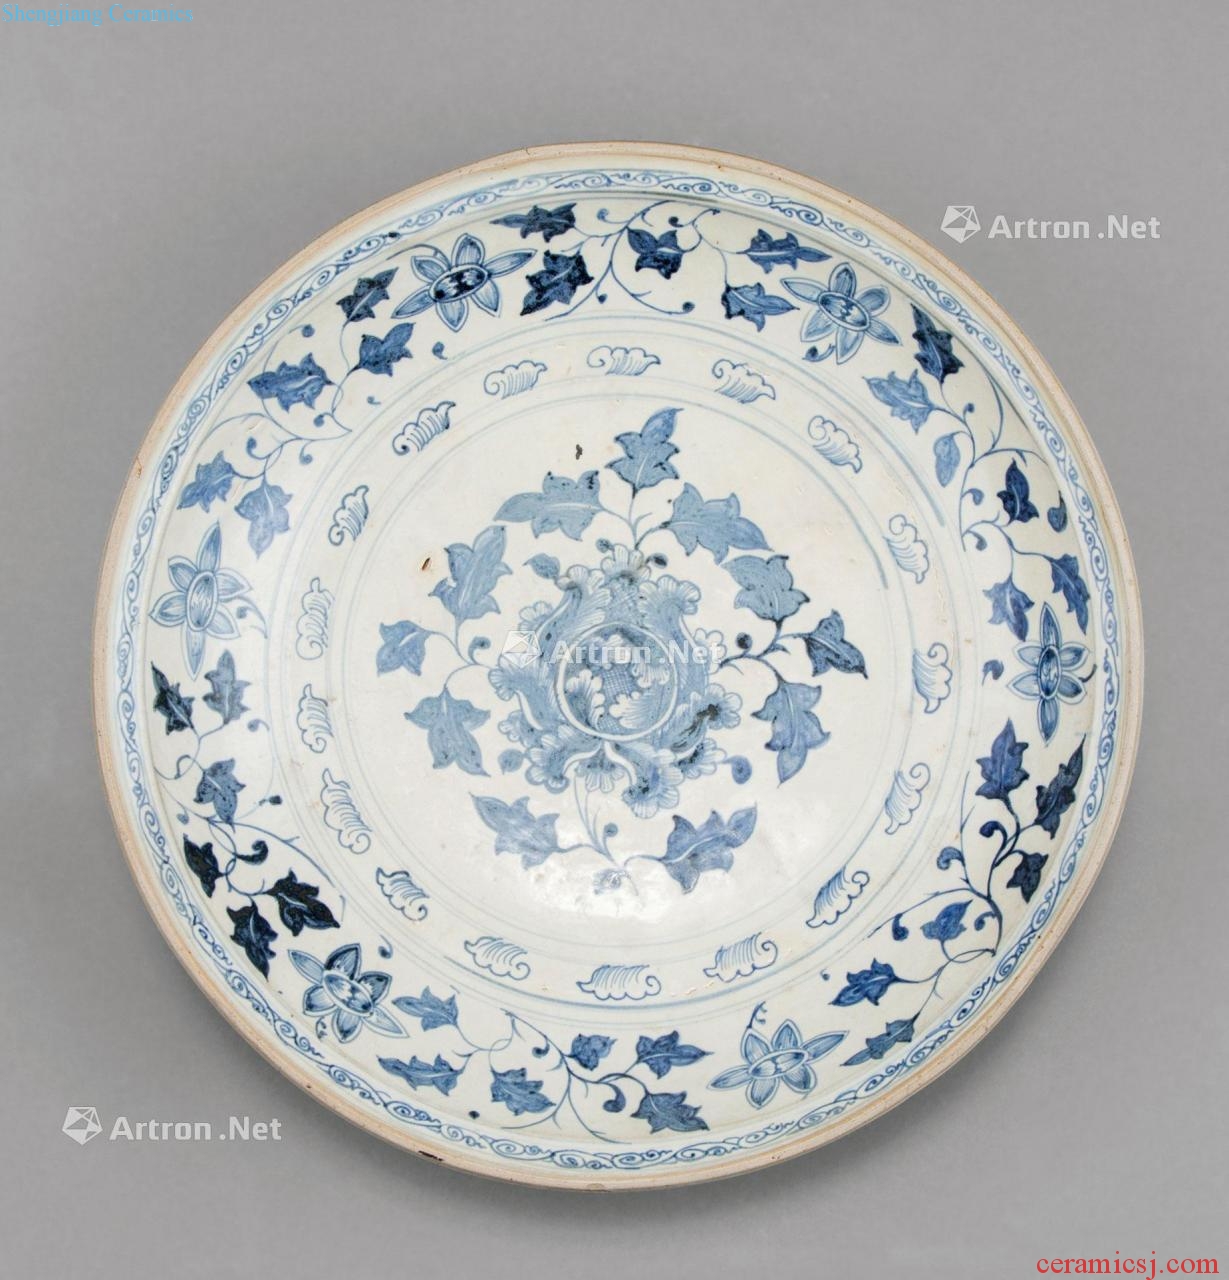 The yuan dynasty Blue and white flower grain market